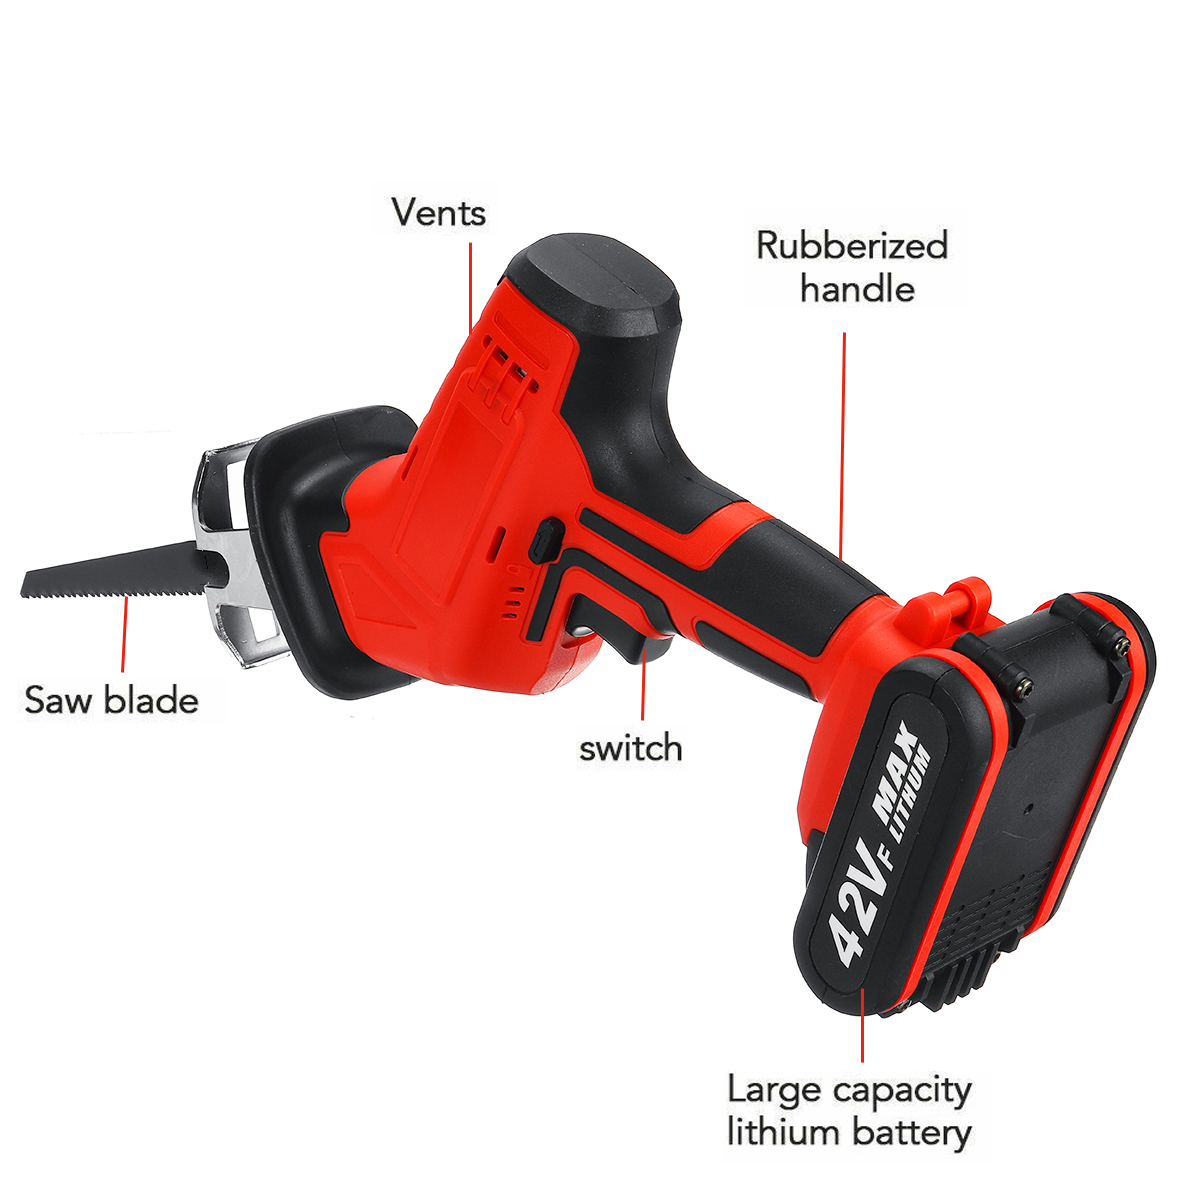 42VF-13000mAh-Cordless-Reciprocating-Saw-Electric-Saws-Portable-Woodworking-Power-Tools-1640981-5